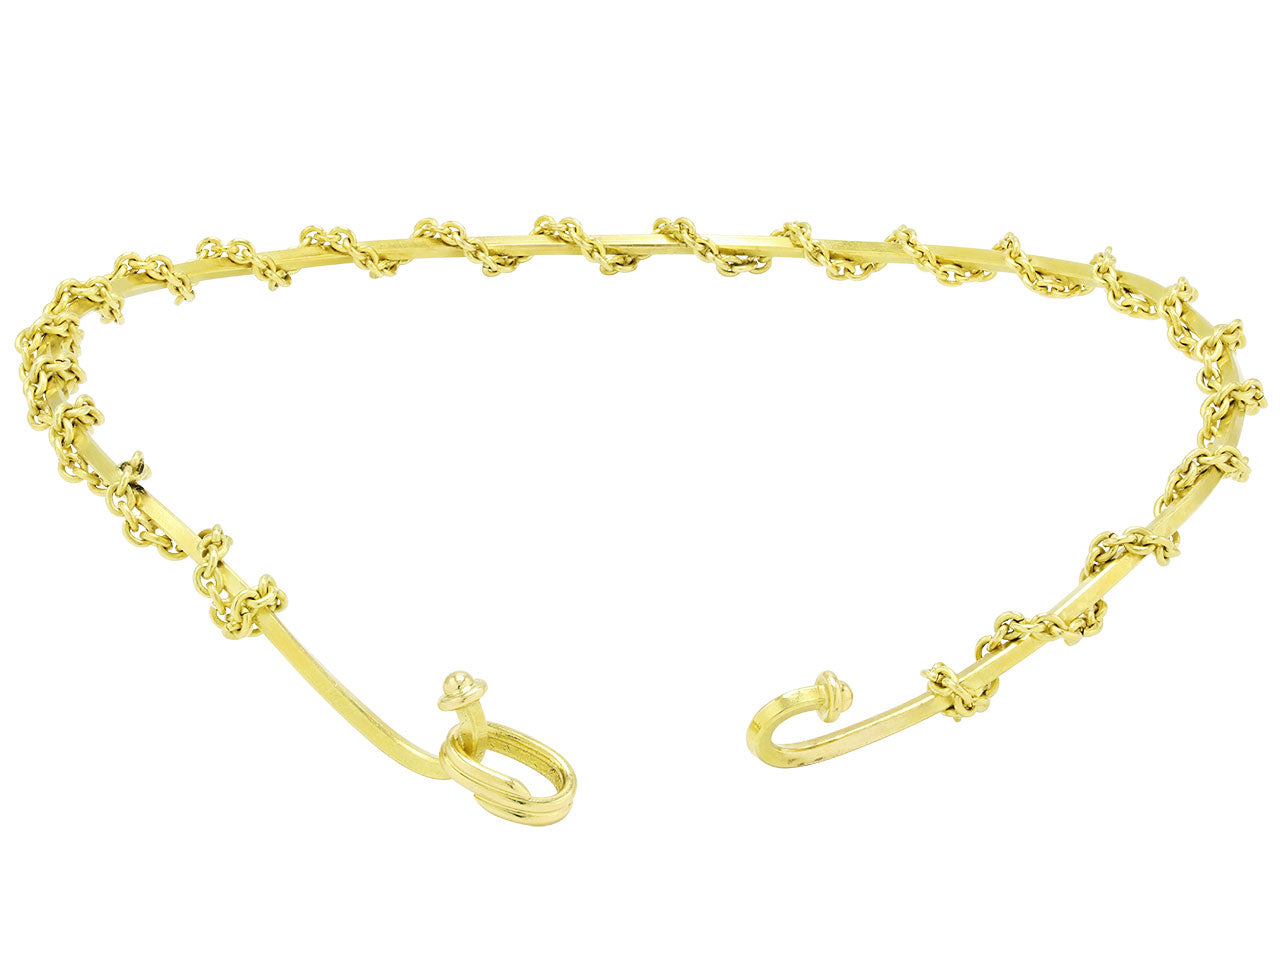 Gold Choker Chain Necklace in 14K Gold